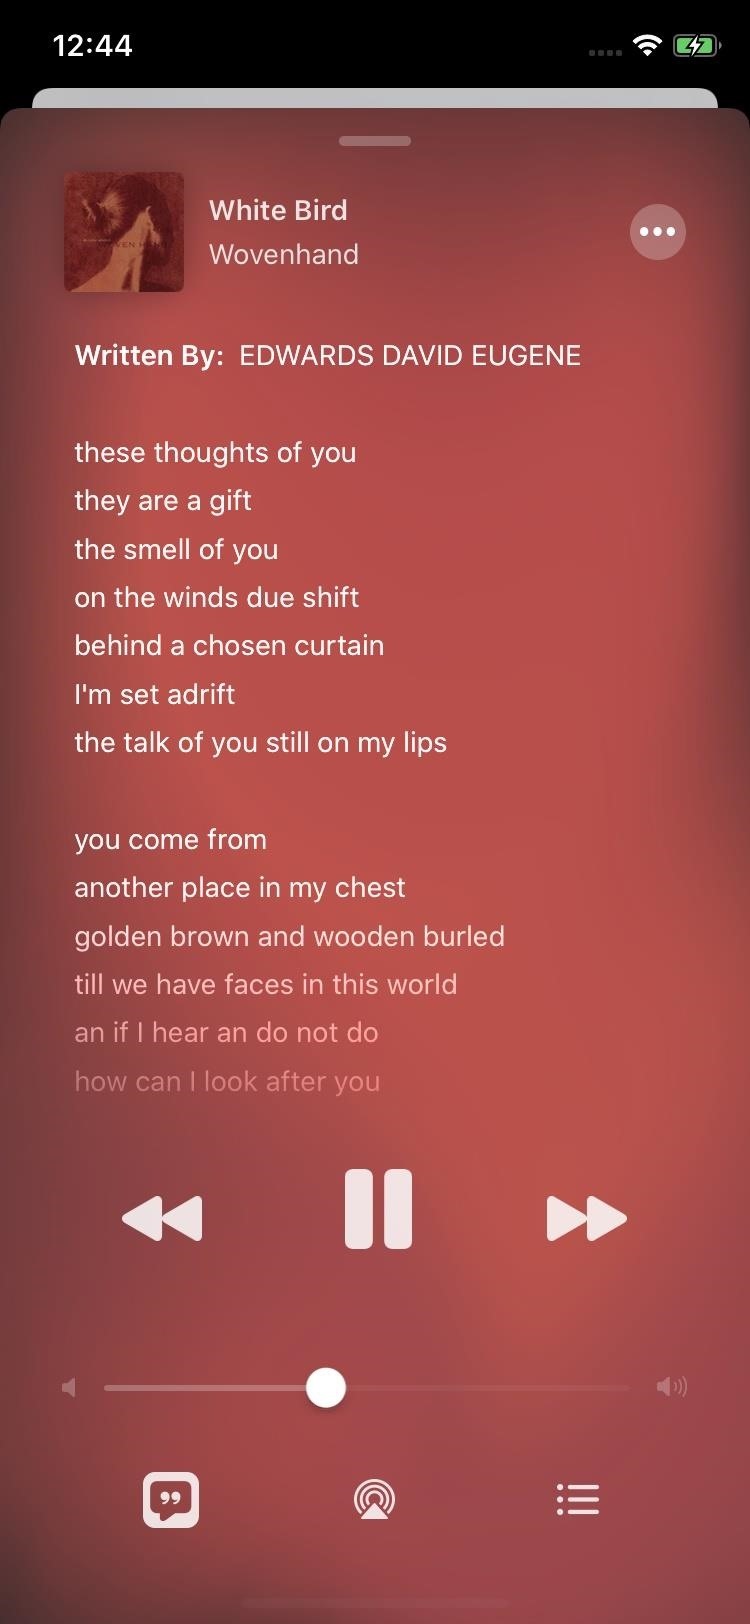 View Moving, Time-Synced Lyrics in Apple Music to Sing Along to Your  Favorite Songs in iOS 13 « iOS & iPhone :: Gadget Hacks